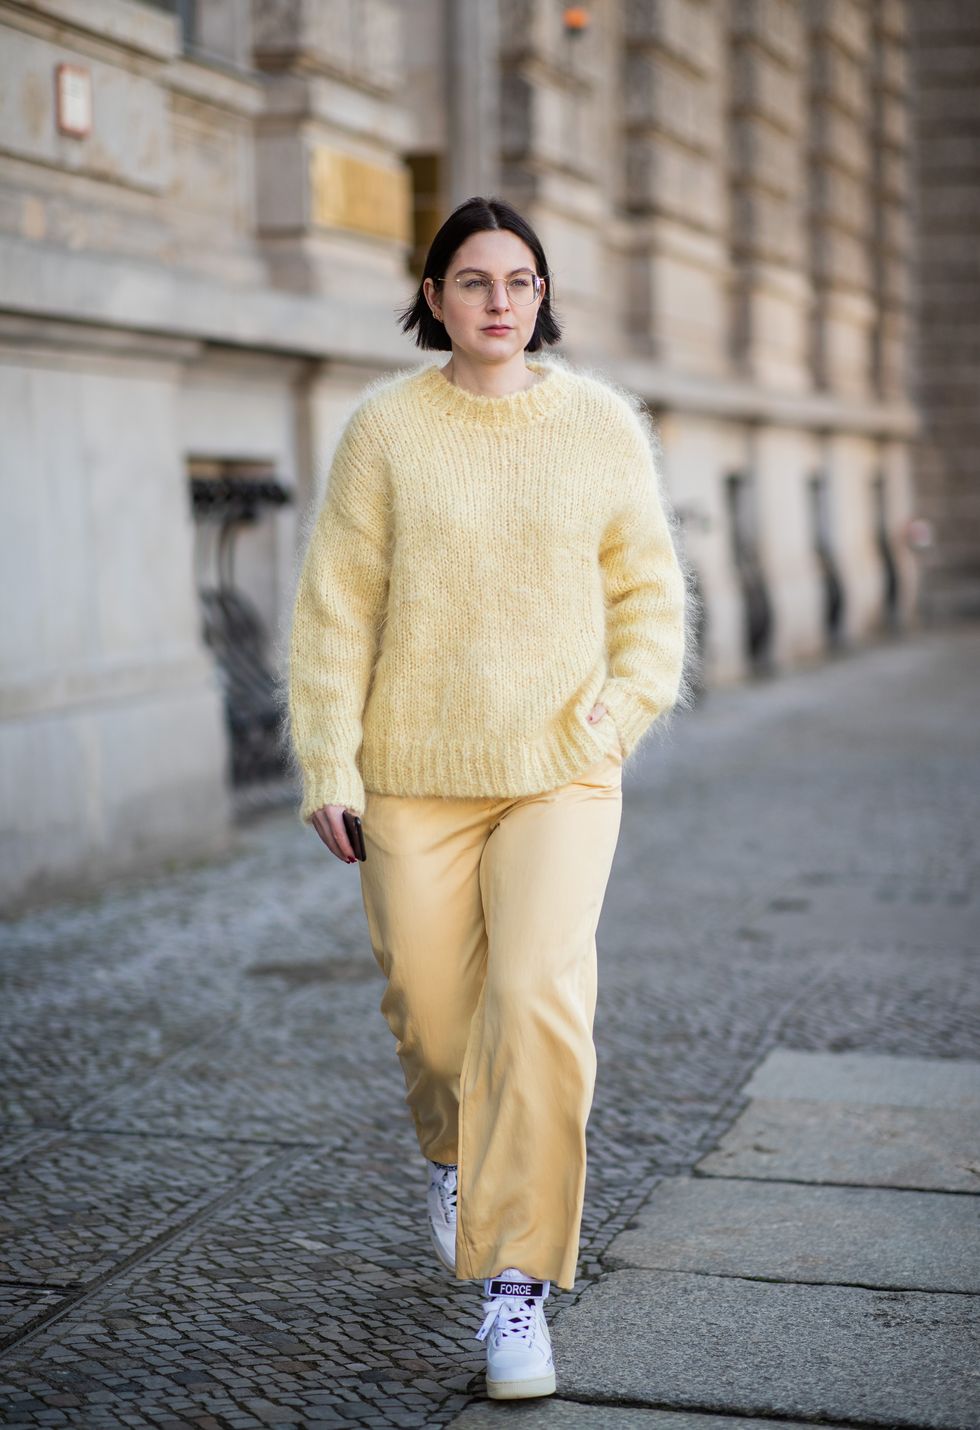 berlin, germany   january 02 maria barteczko is seen wearing yellow mohair sweater hm, yellow wide leg pants hm, white high top sneaker nike air force, gold round retro glasses ray ban on january 02, 2019 in berlin, germany photo by christian vieriggetty images